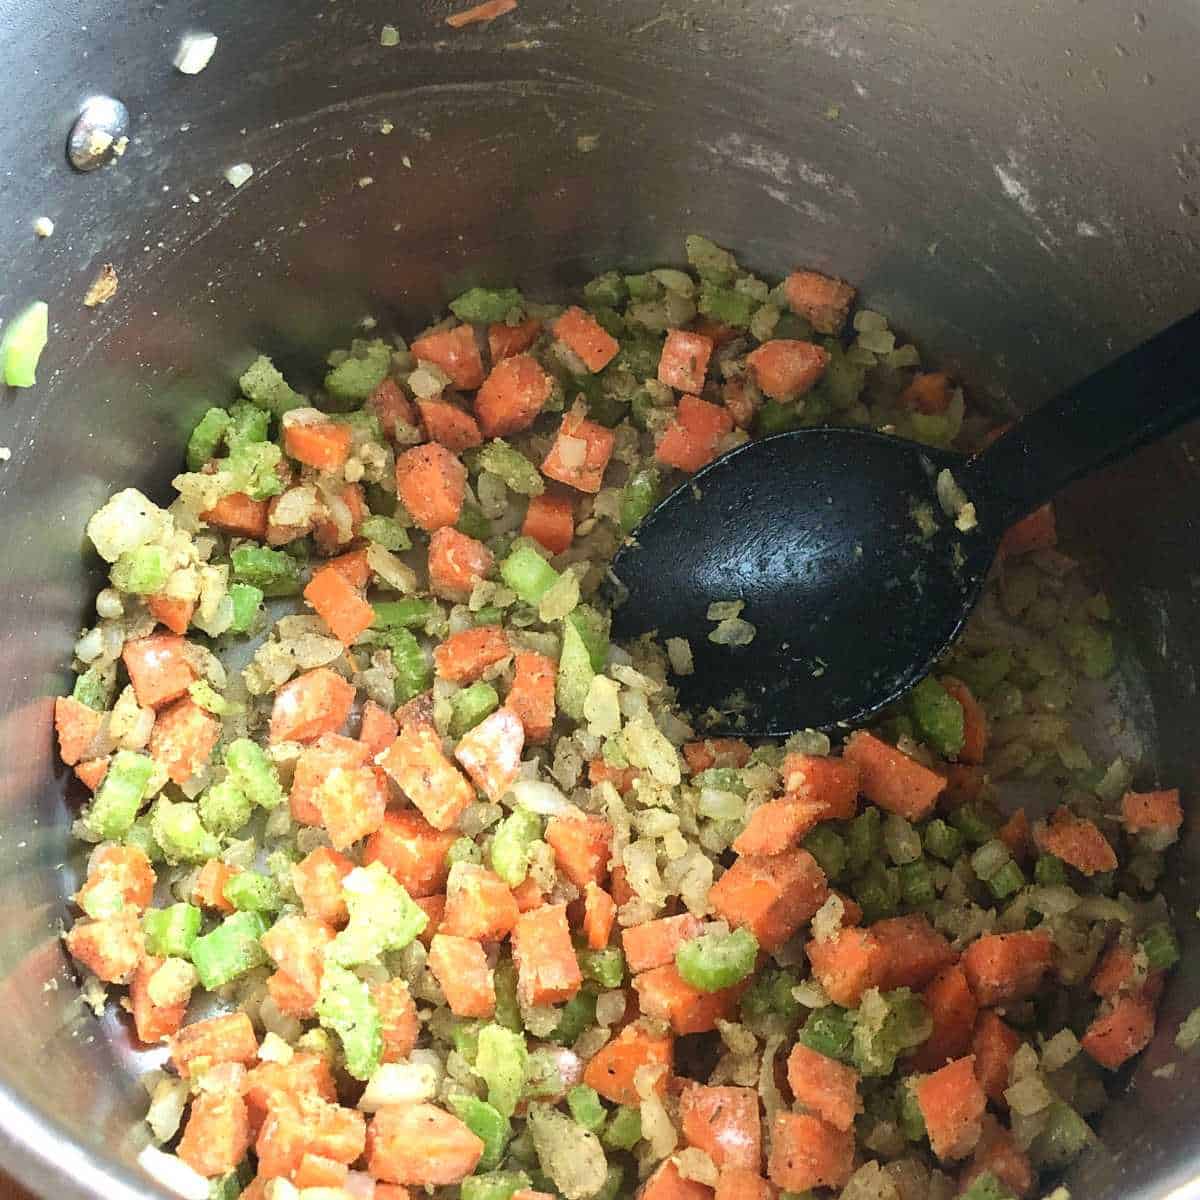 Carrots, celery, and onion mixture coated in gluten free flour